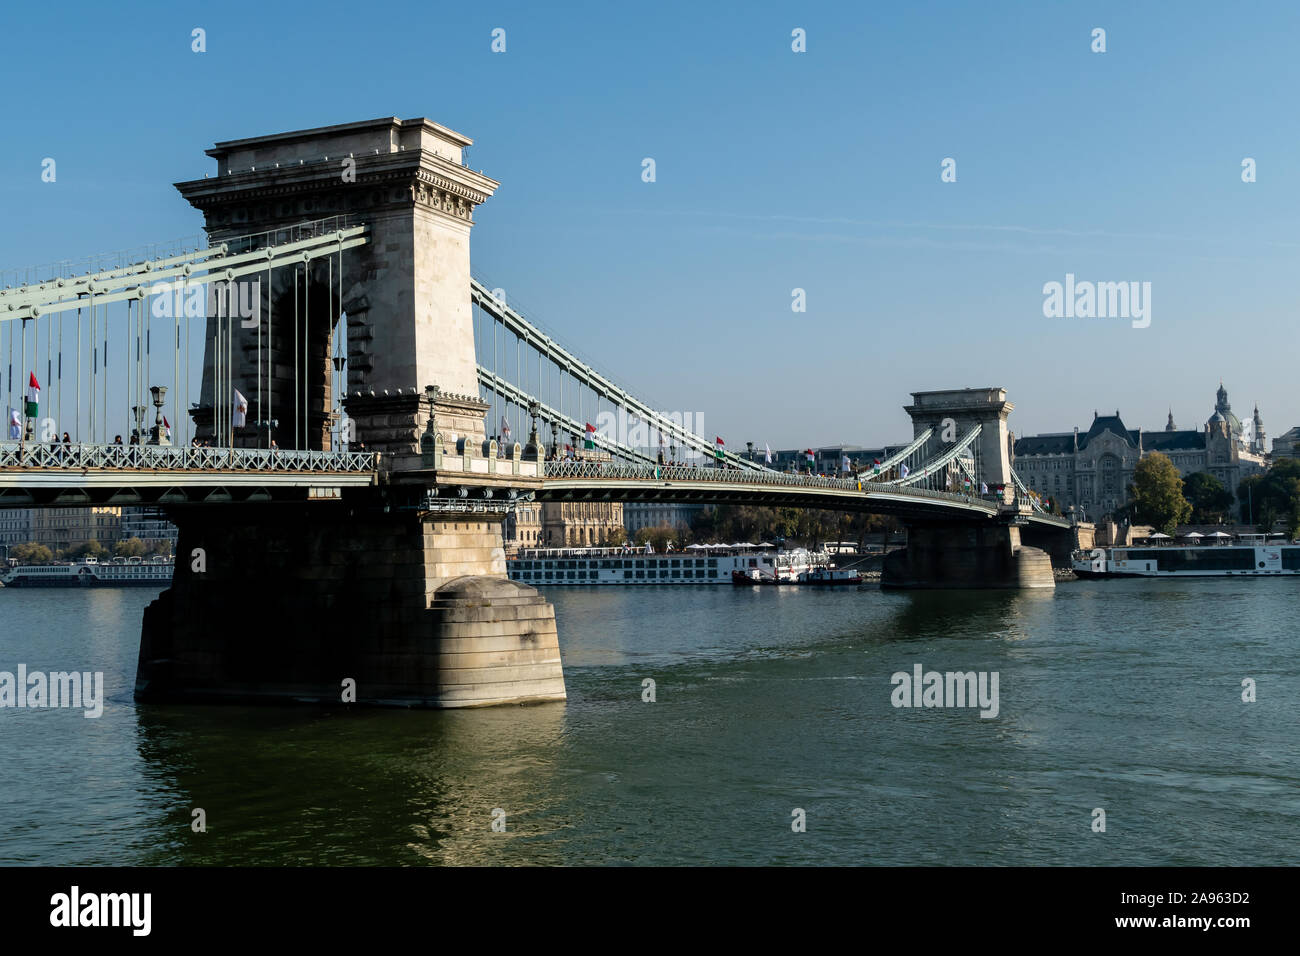 The Chain Bridge that crosses the river Danube from the Pest side to Buda, in Budapest, Hungary Stock Photo